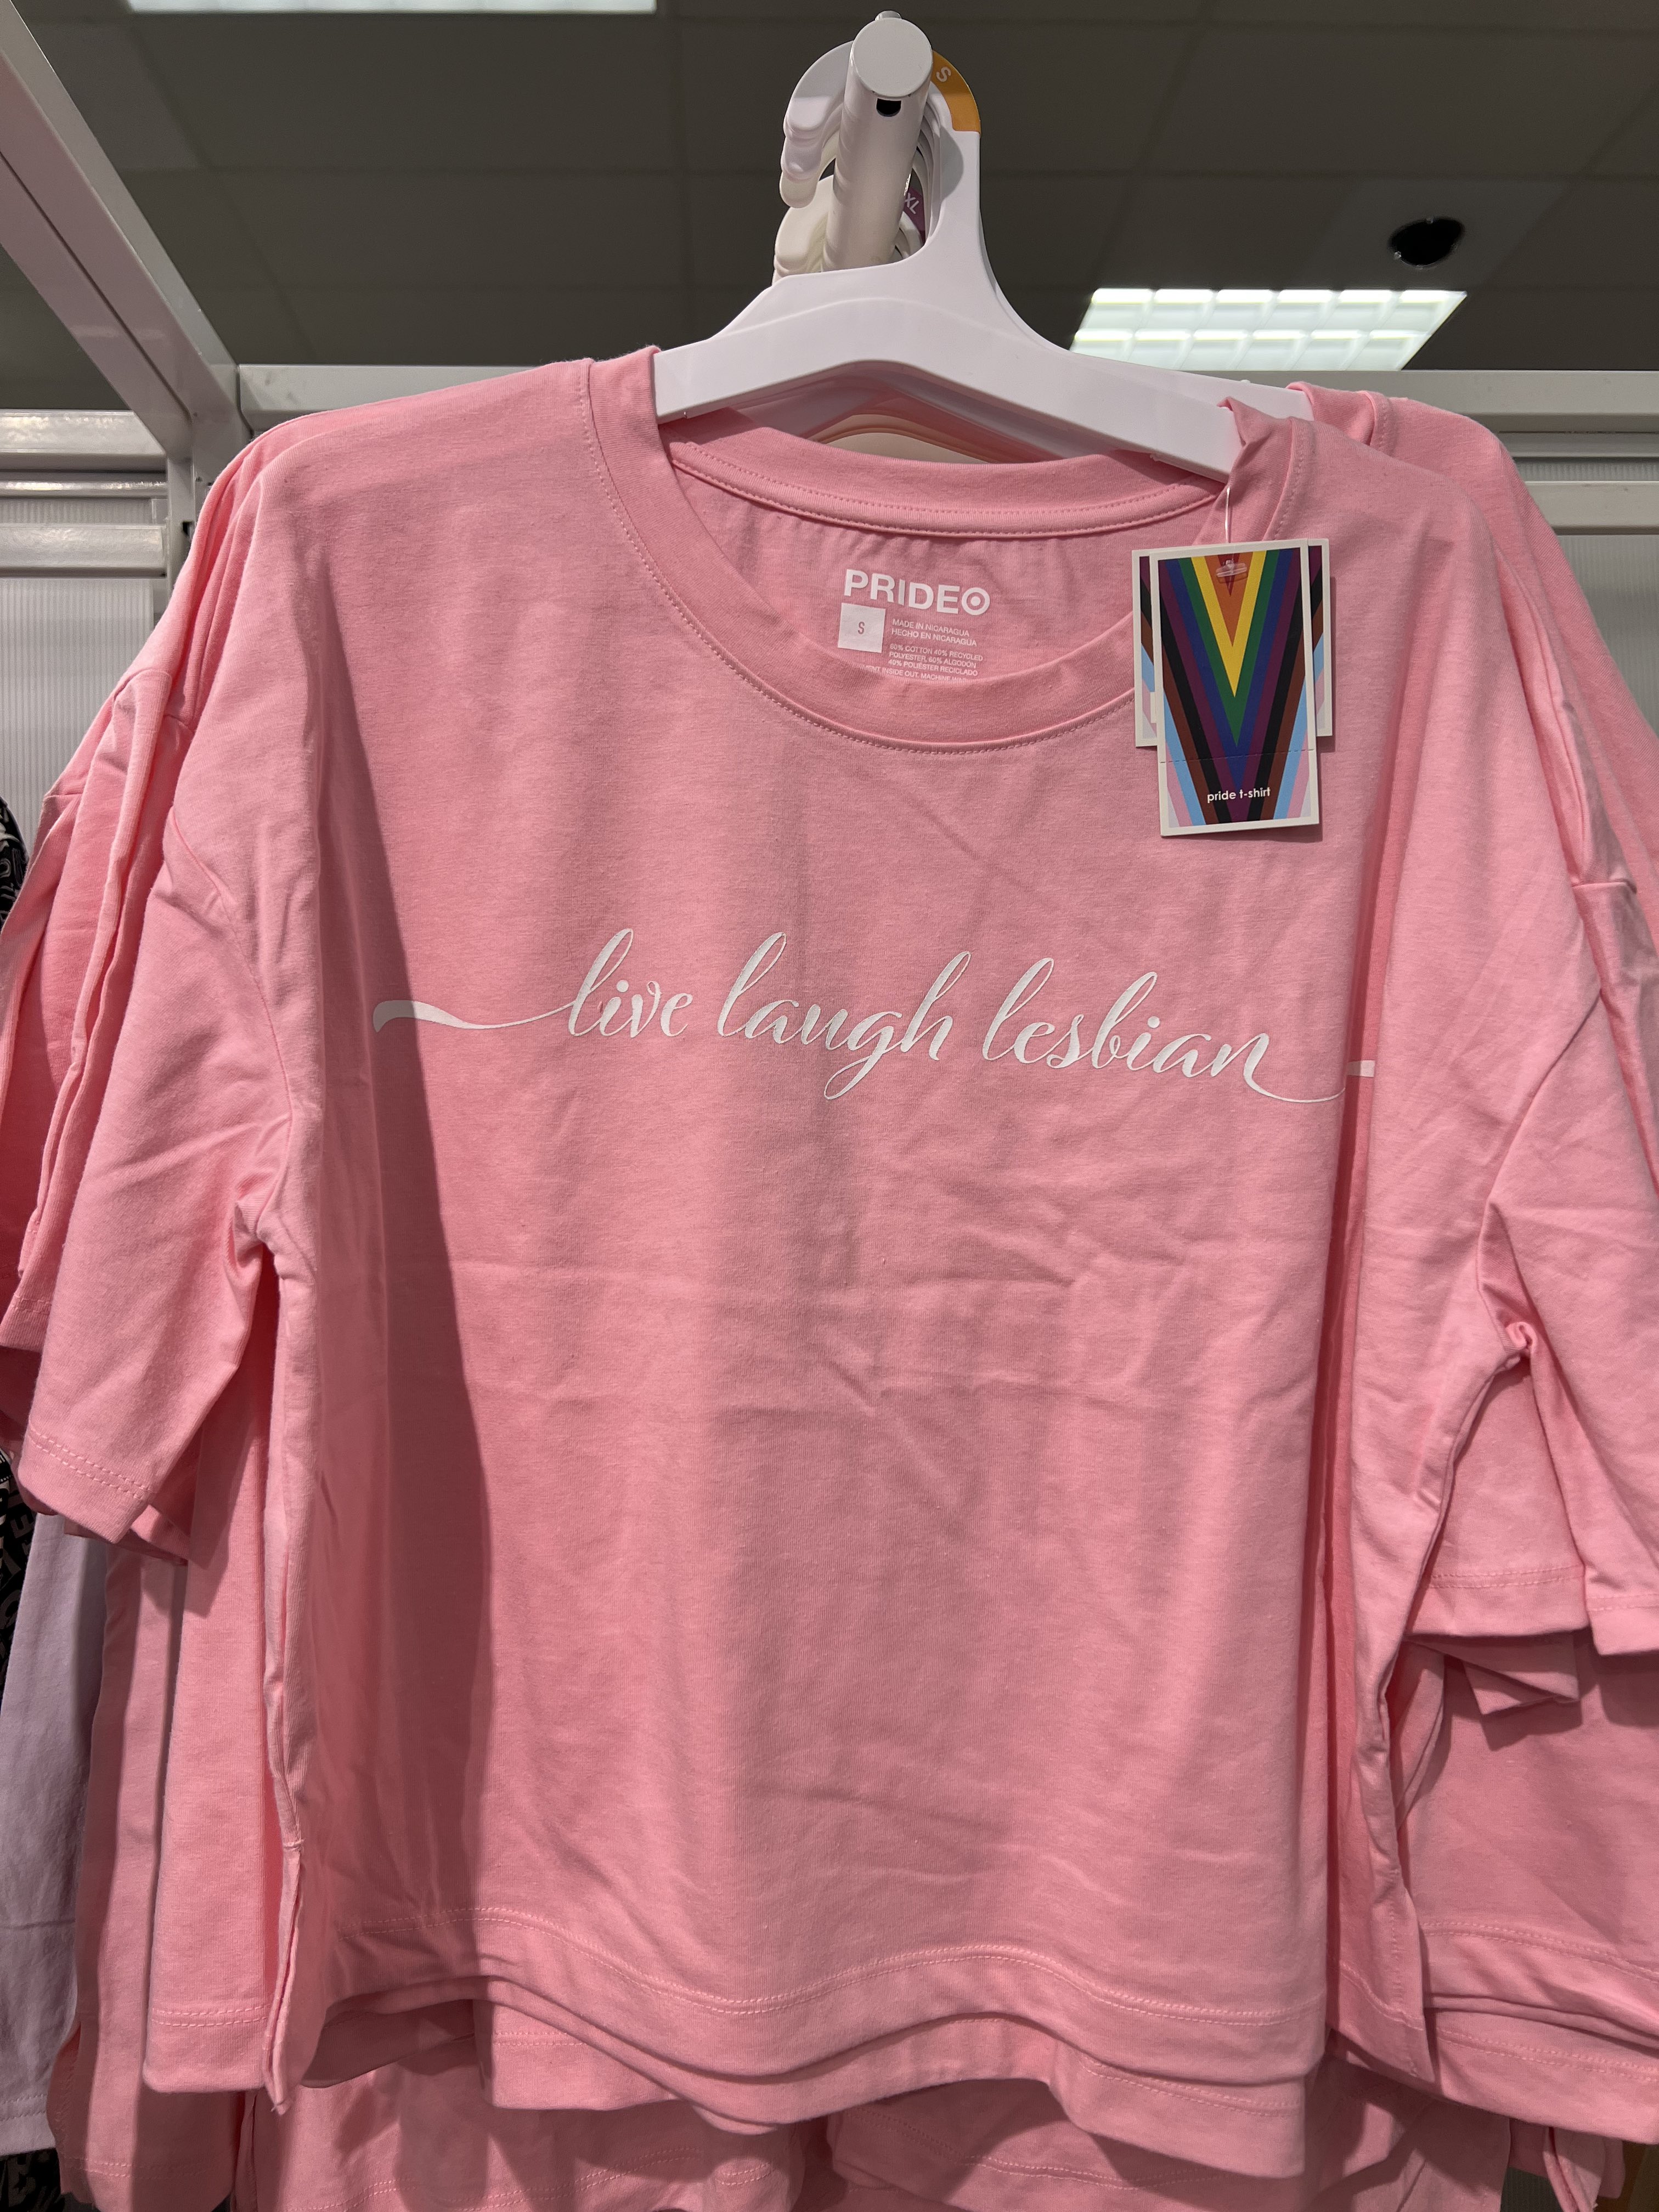 mark on X: Target Pride collection just dropped  /  X